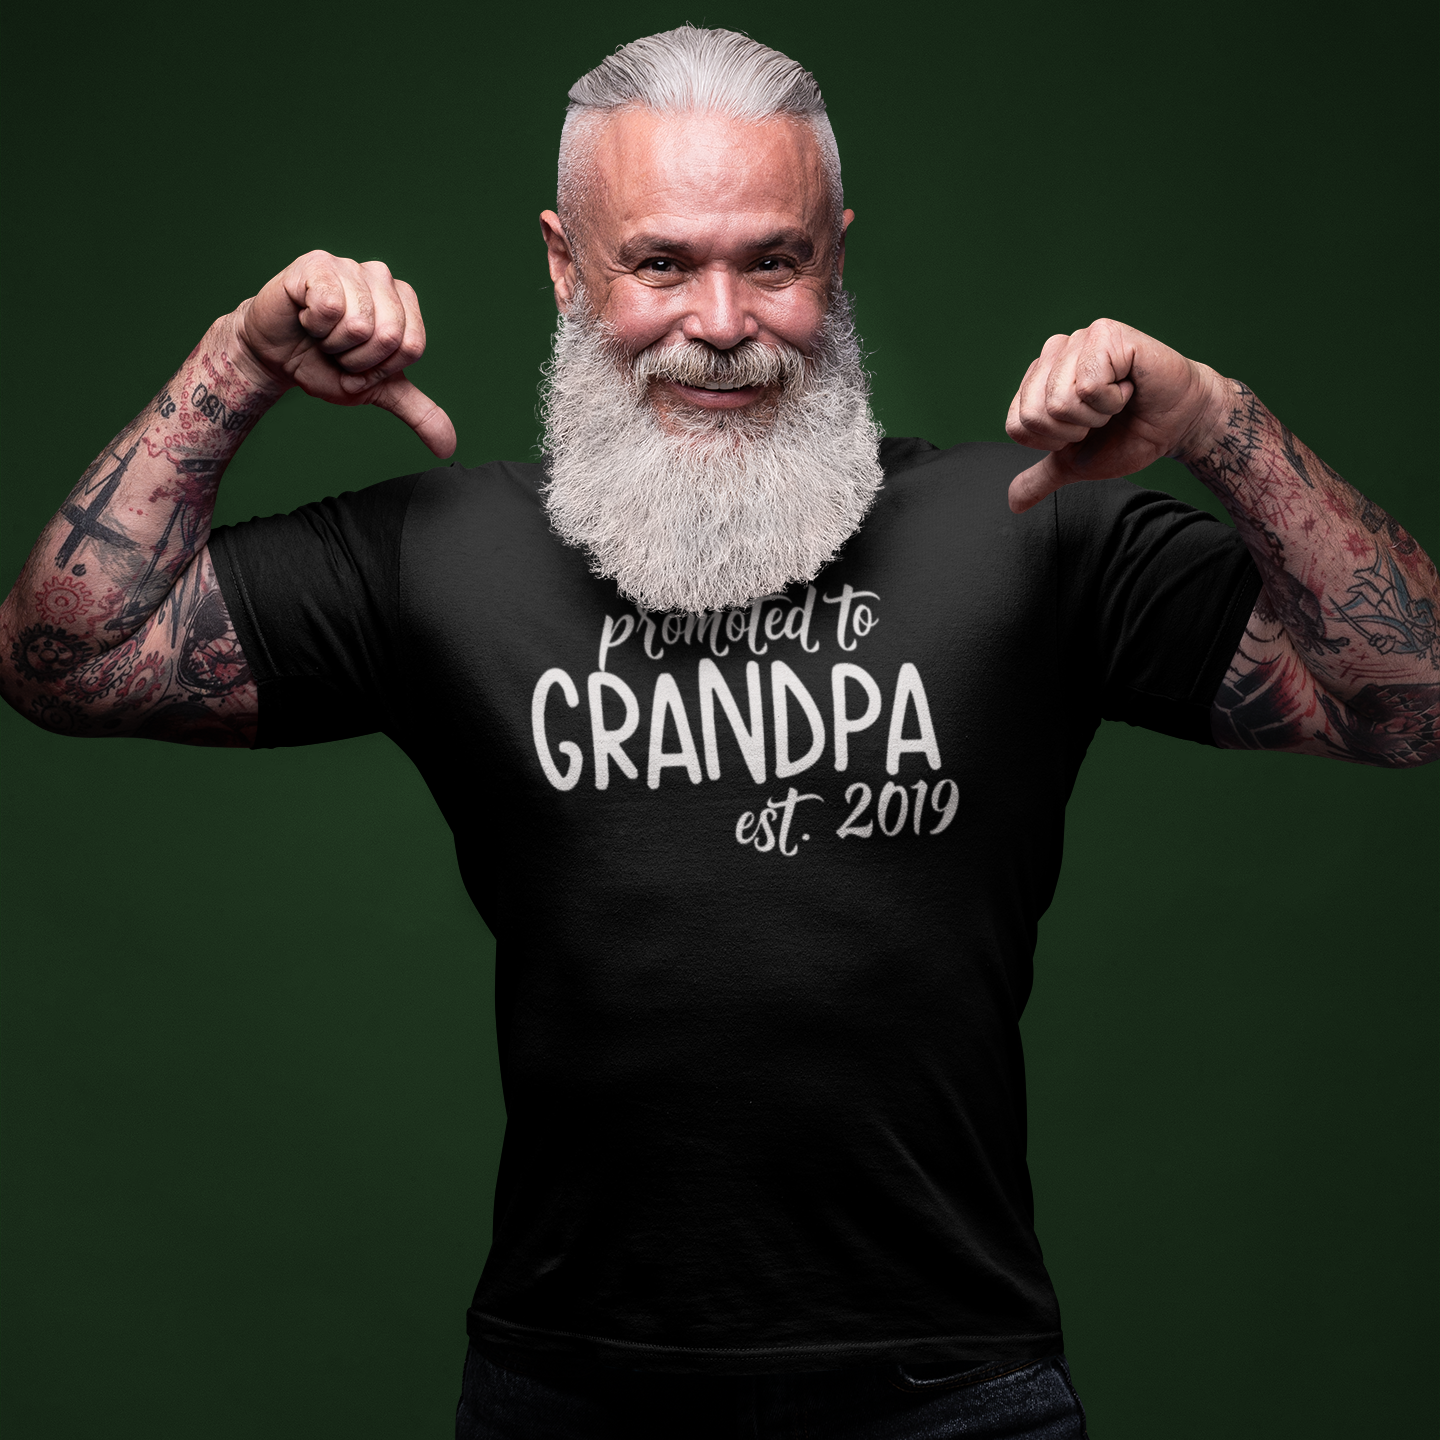 'Promoted to grandpa' adult shirt